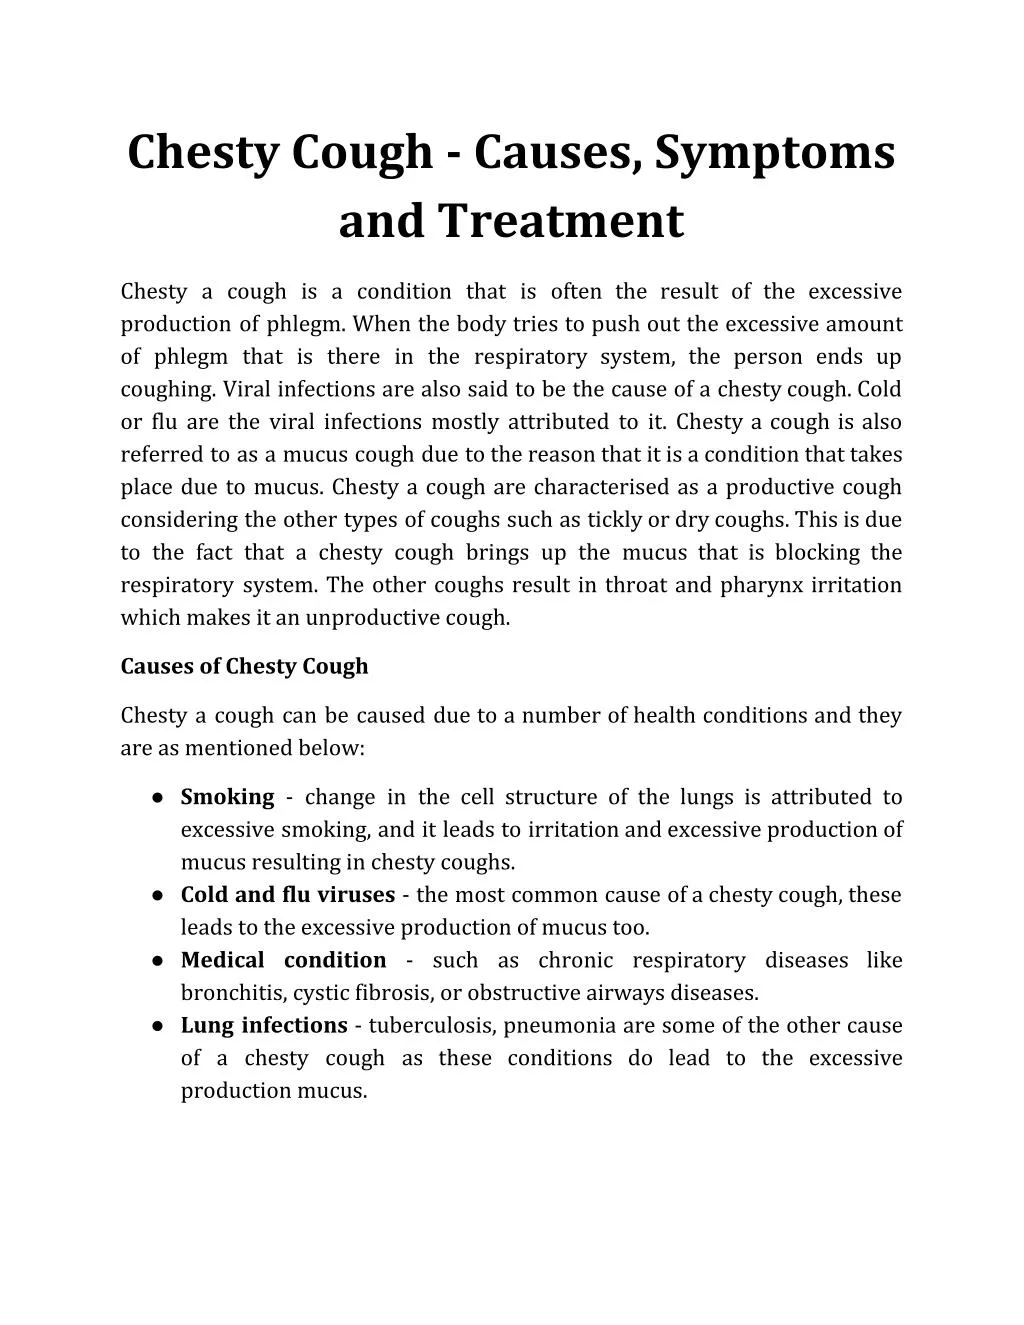 chesty cough causes symptoms and treatment